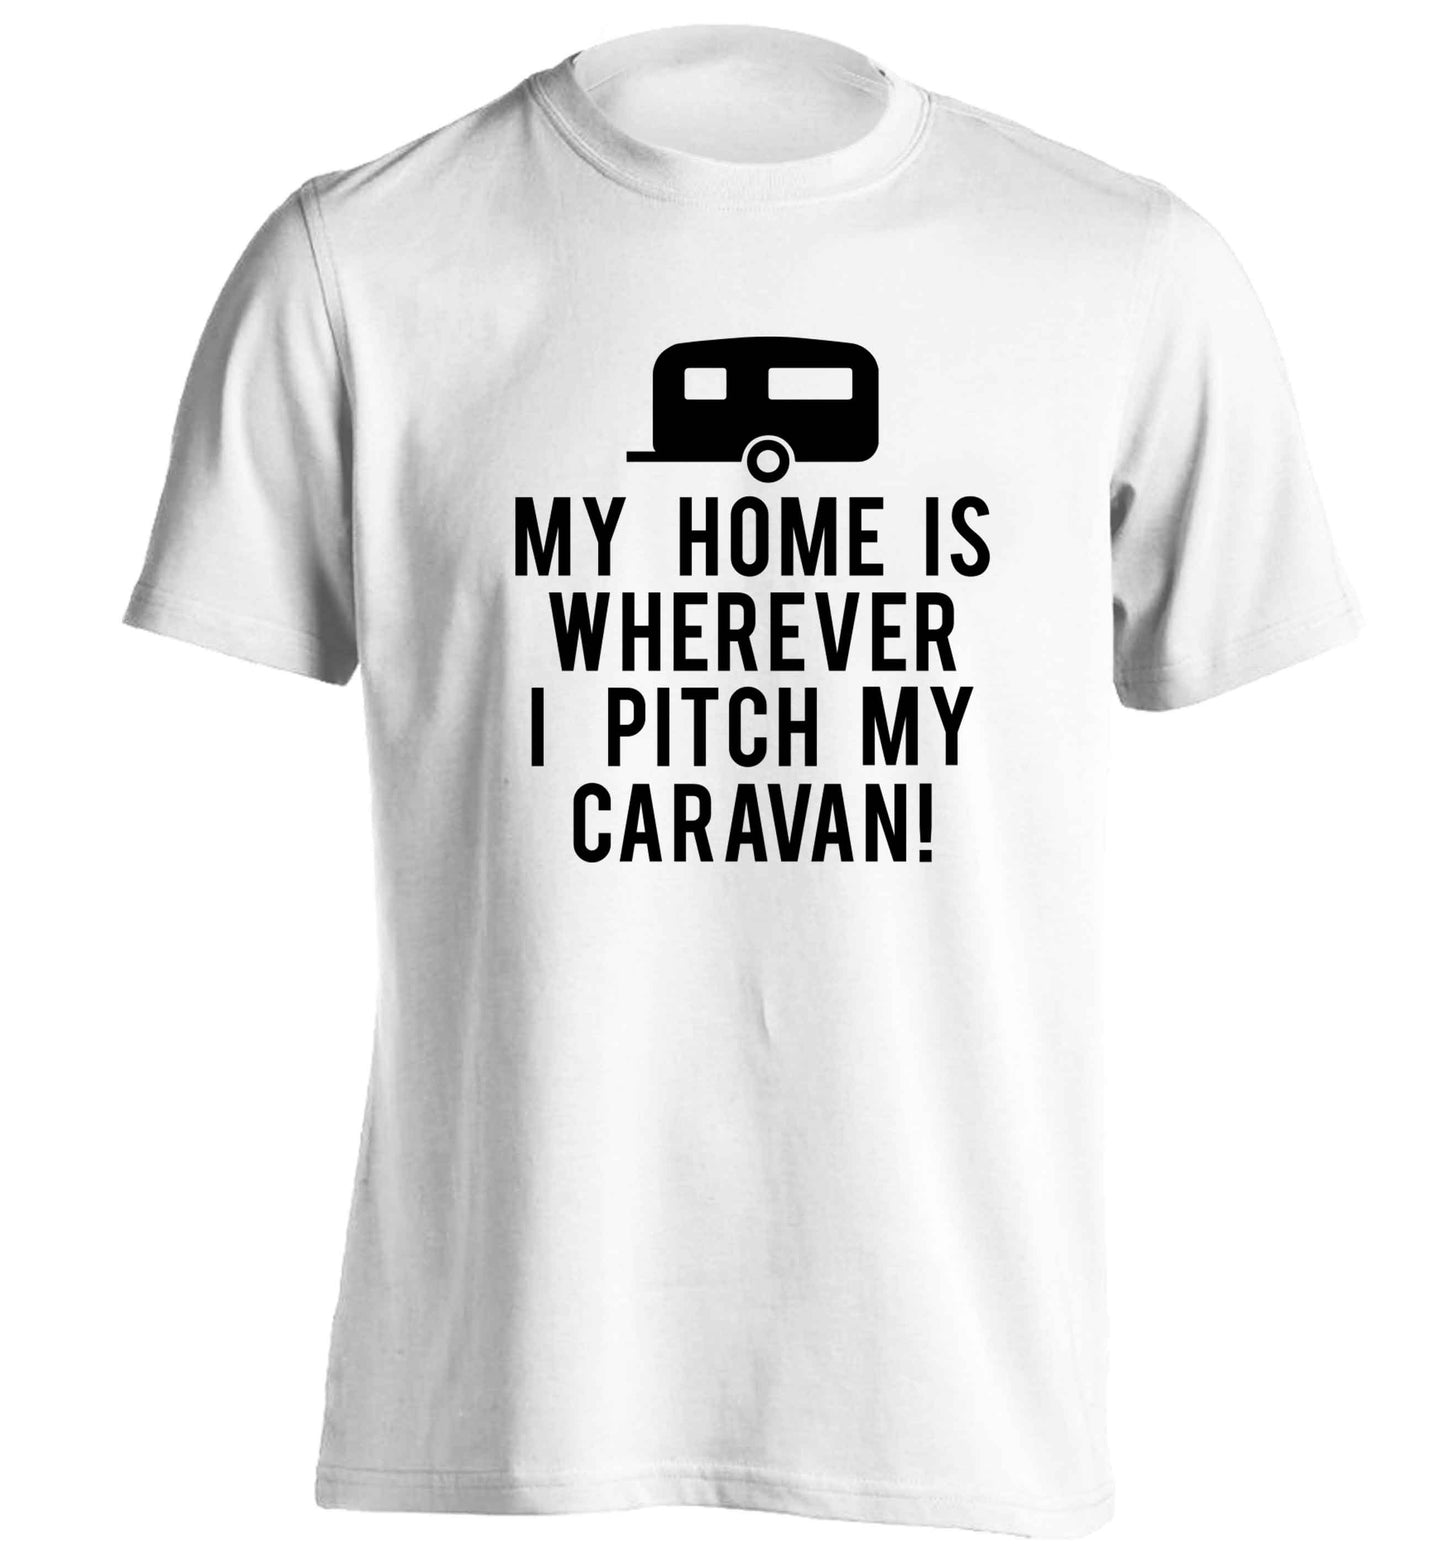 My home is wherever I pitch my caravan adults unisex white Tshirt 2XL